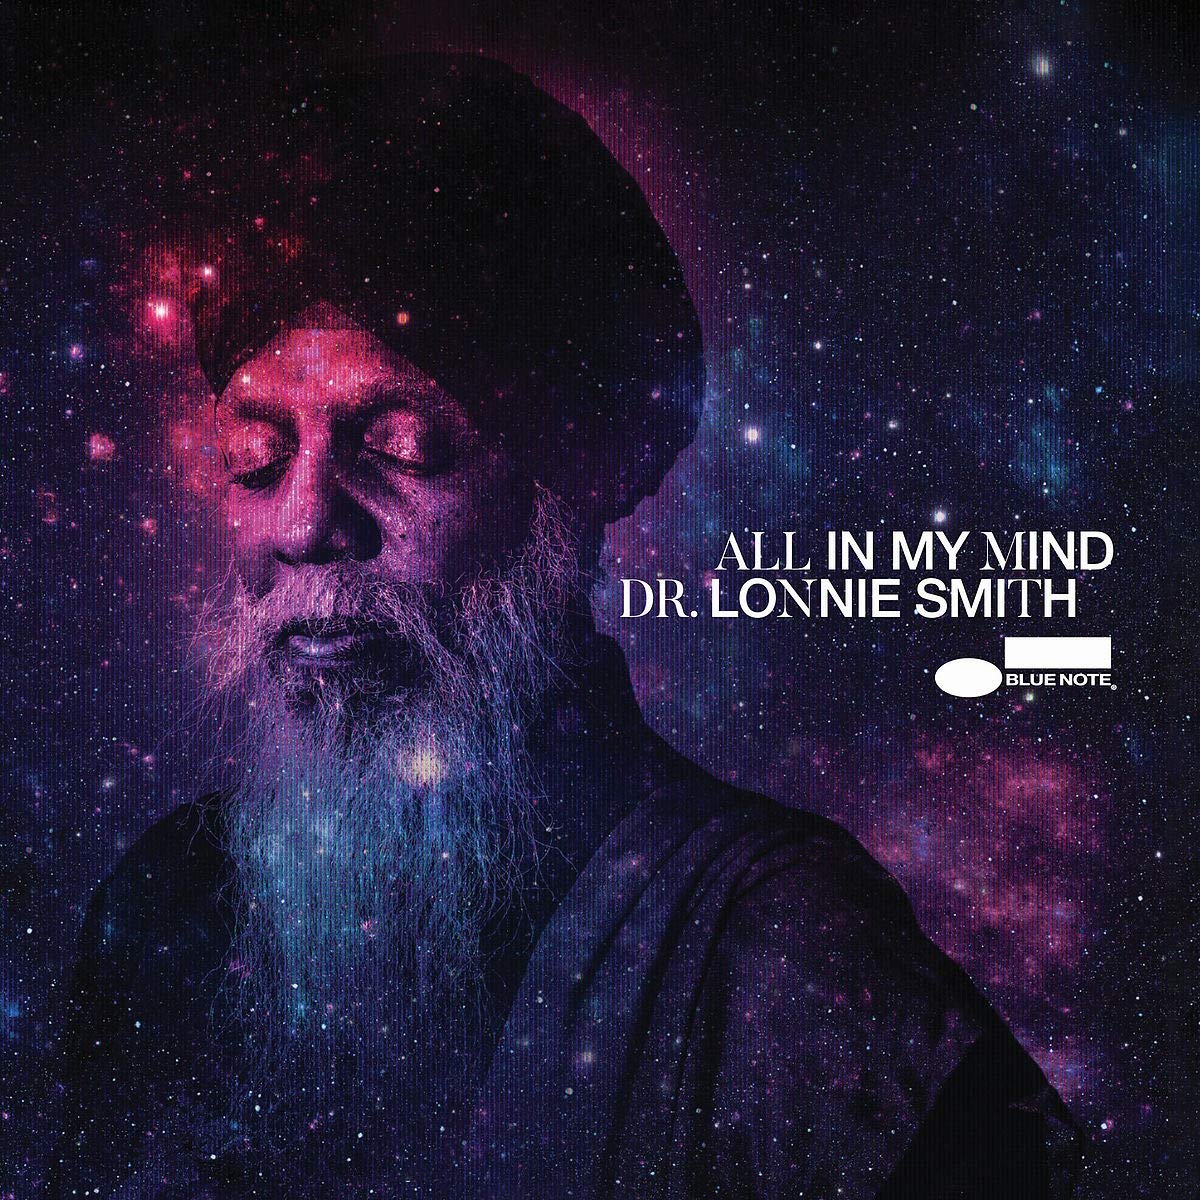 Dr. Lonnie Smith - All In My Mind LP (180g, Blue Note Tone Poet Series, Audiophile)